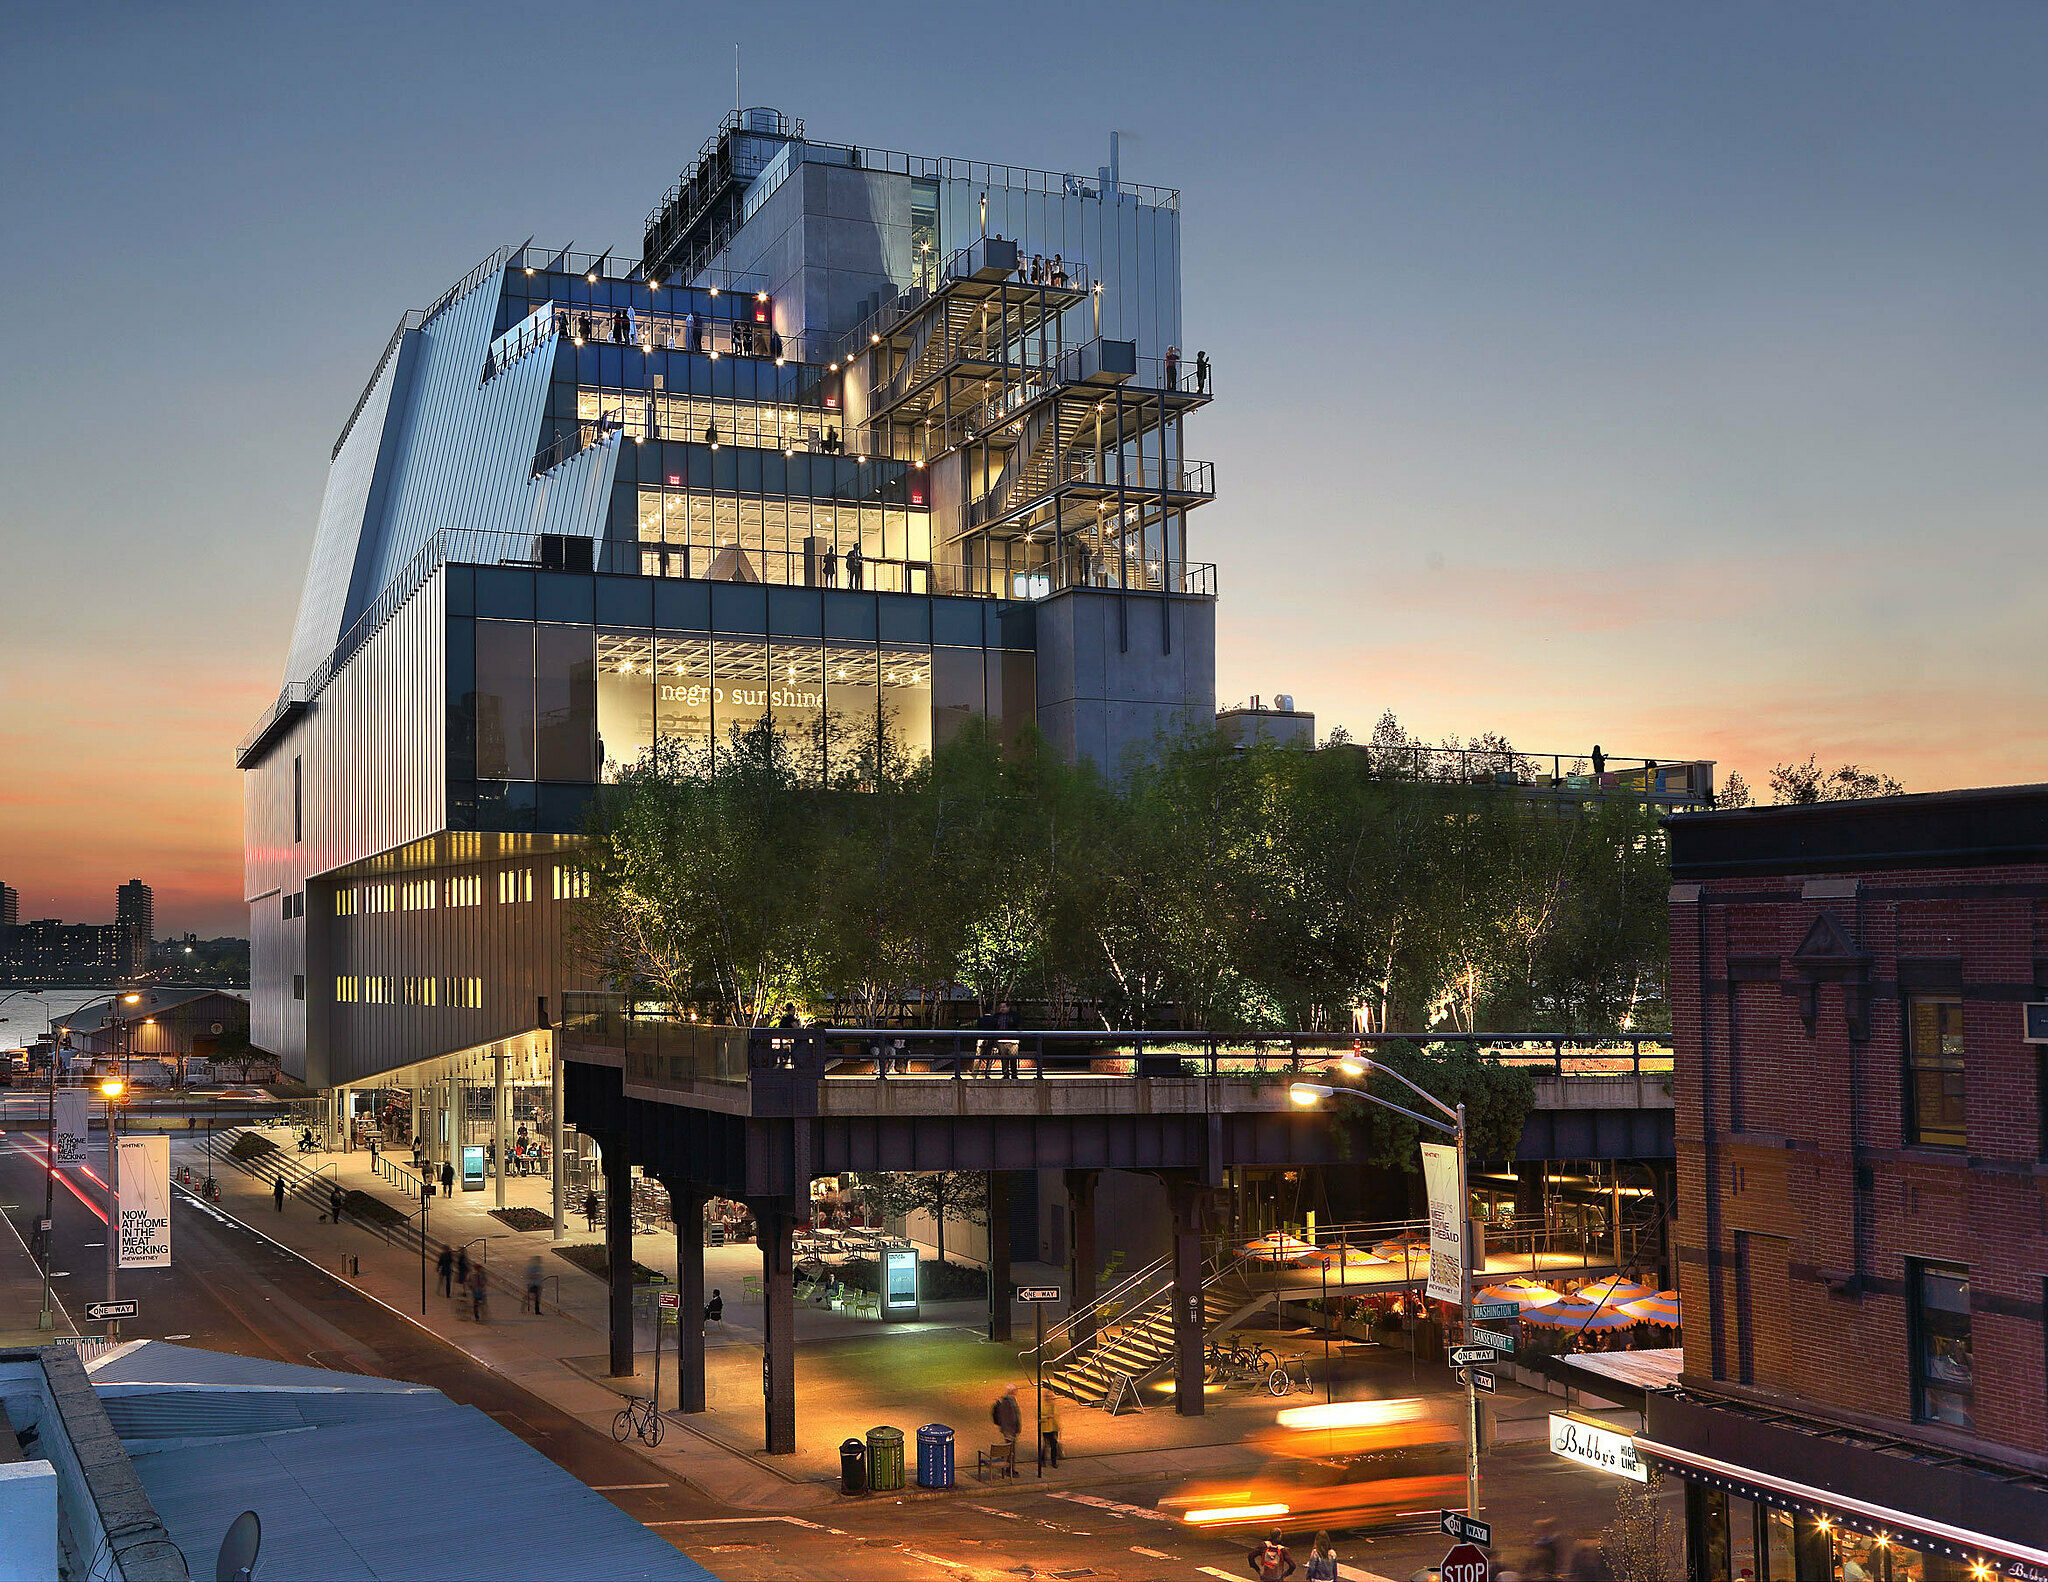 The Whitney Museum of American Art building at night